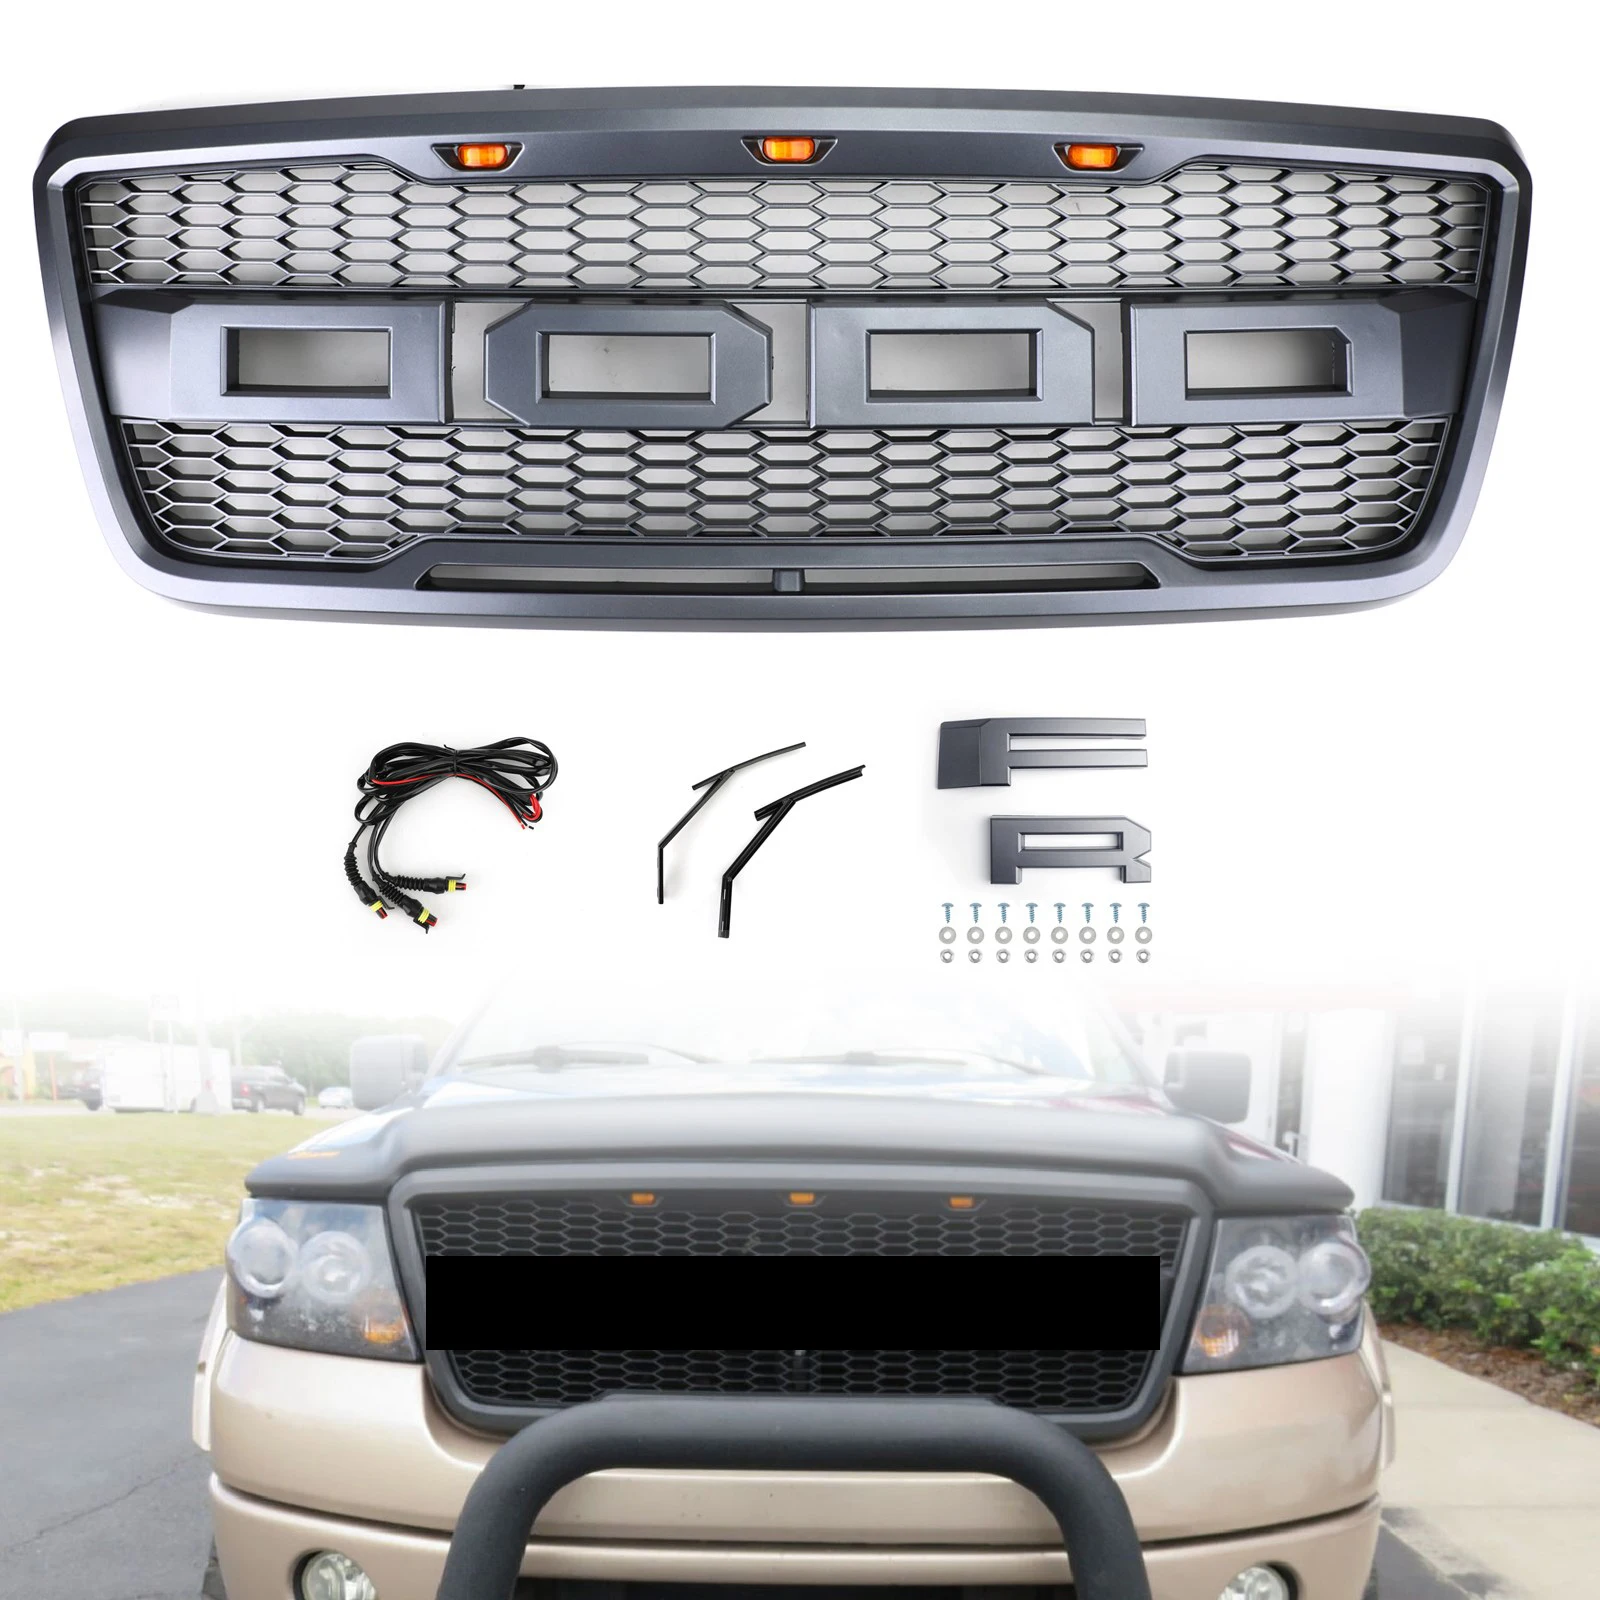 

Areyourshop Raptor Style Front Mesh Hood Grill Grille For Ford F150 F-150 2004-2008 With LED and Logo